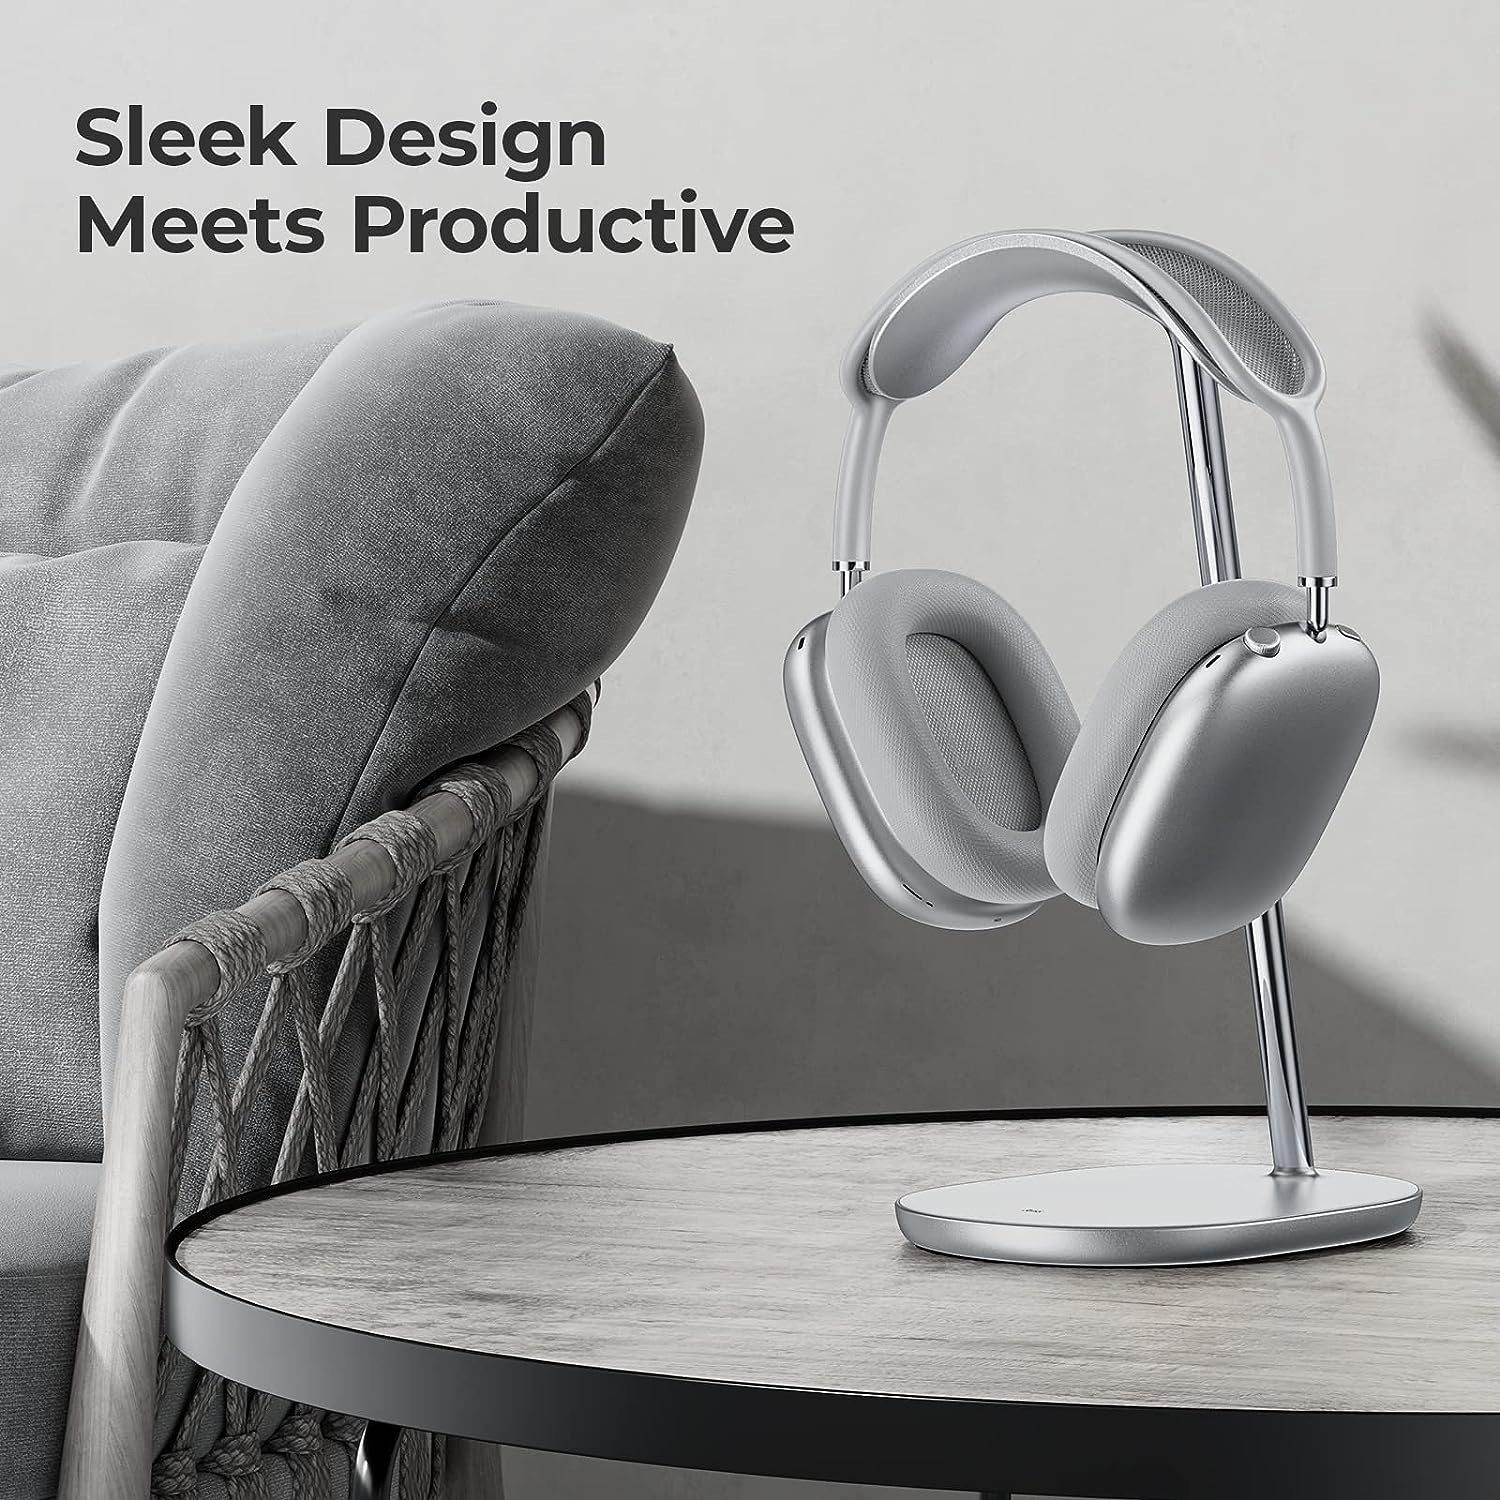 Synopsis: BENKS Headphone Stand, Airpods Max Stand, Desktop Headset Holder, Gaming Headset Accessories, Desk Earphone Stand